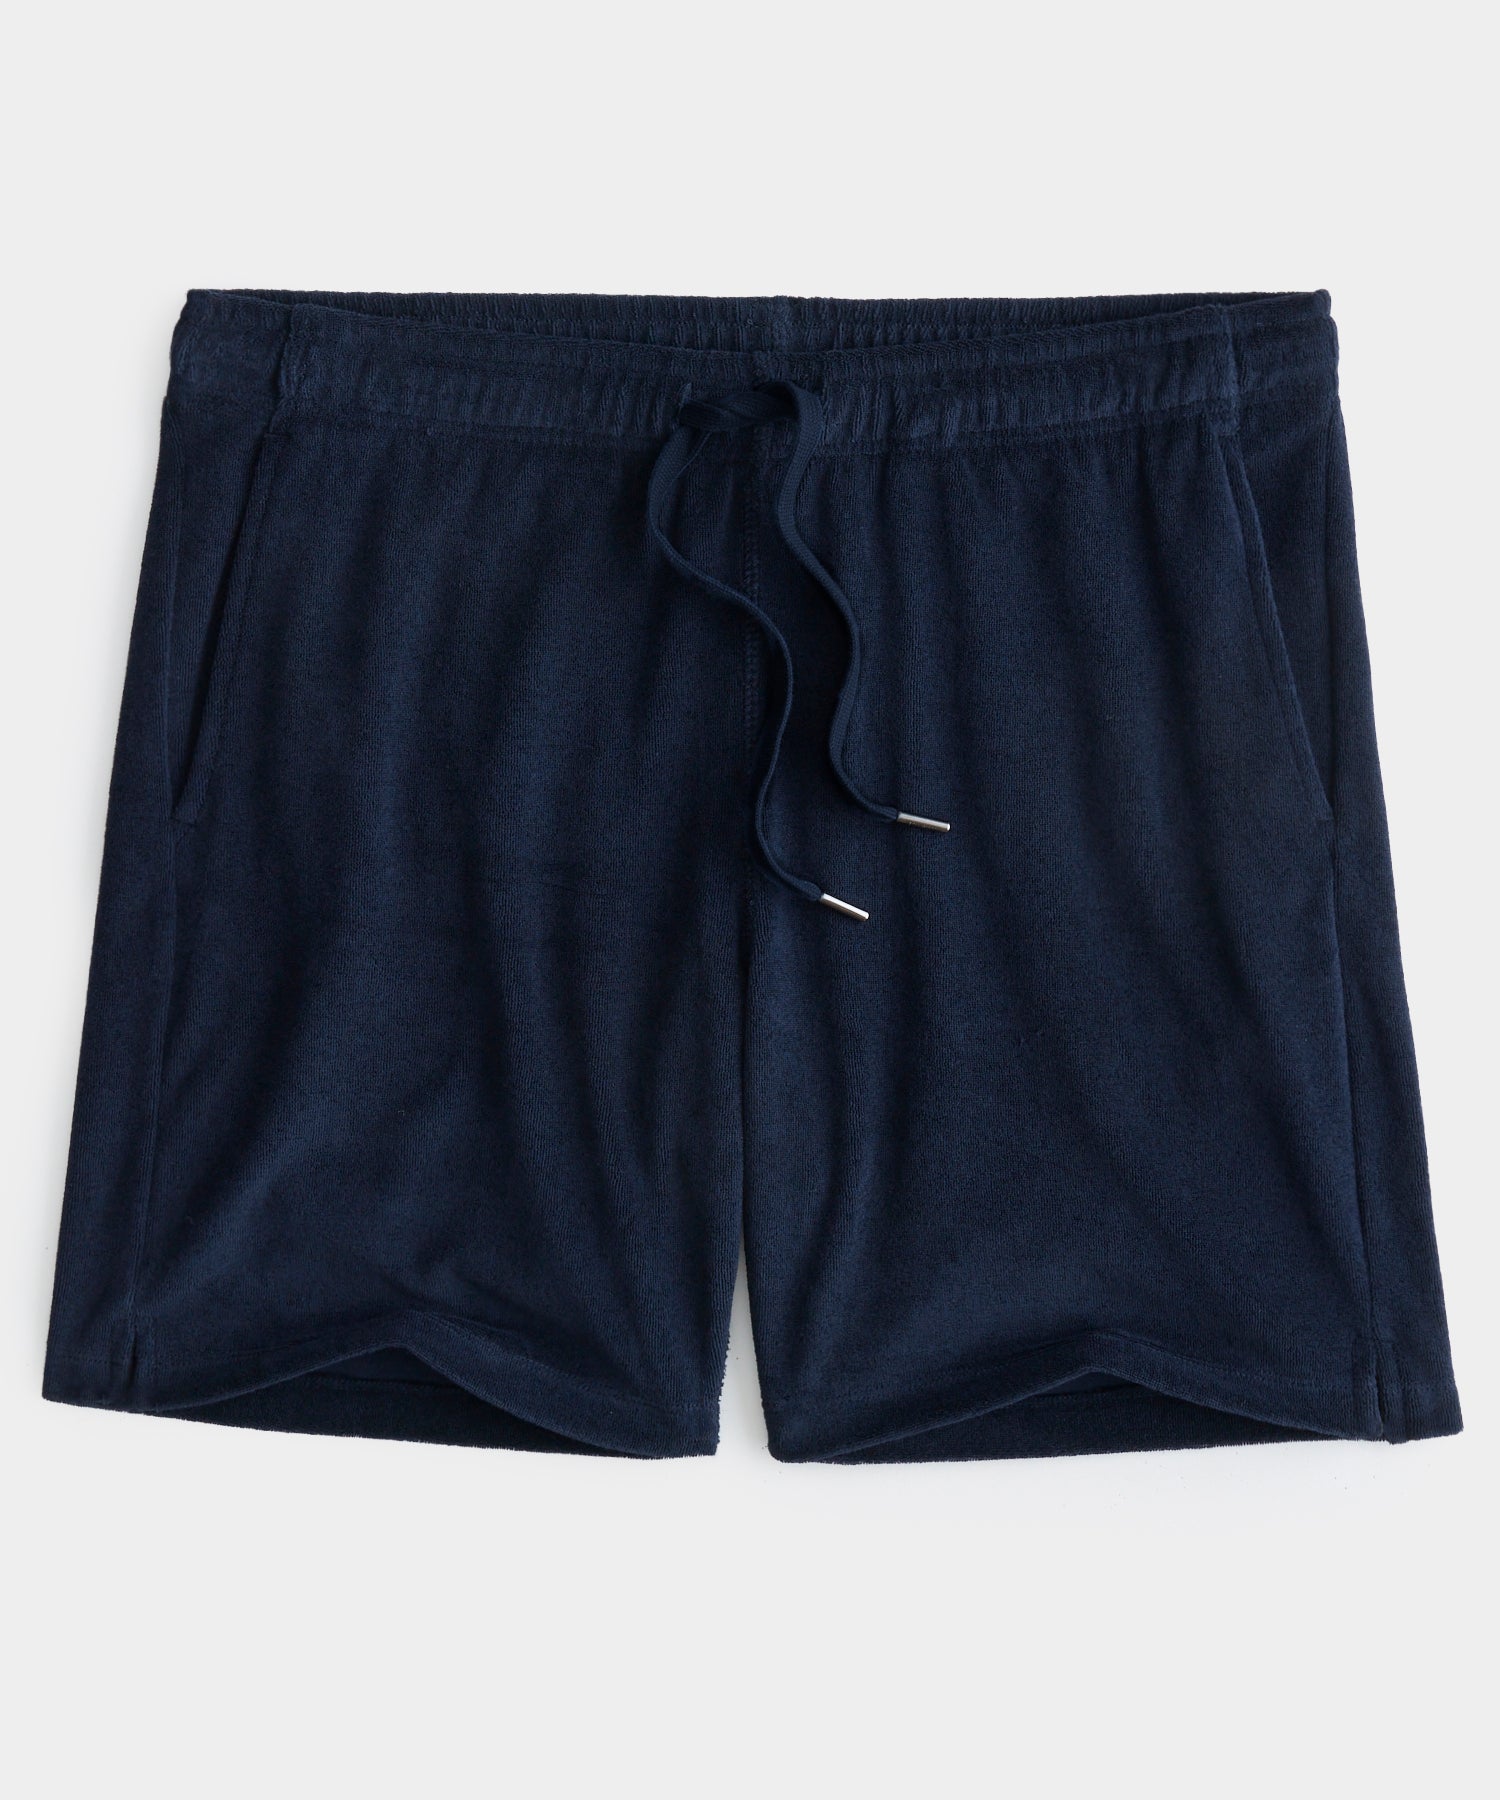 Terry Cloth Short in Classic Navy